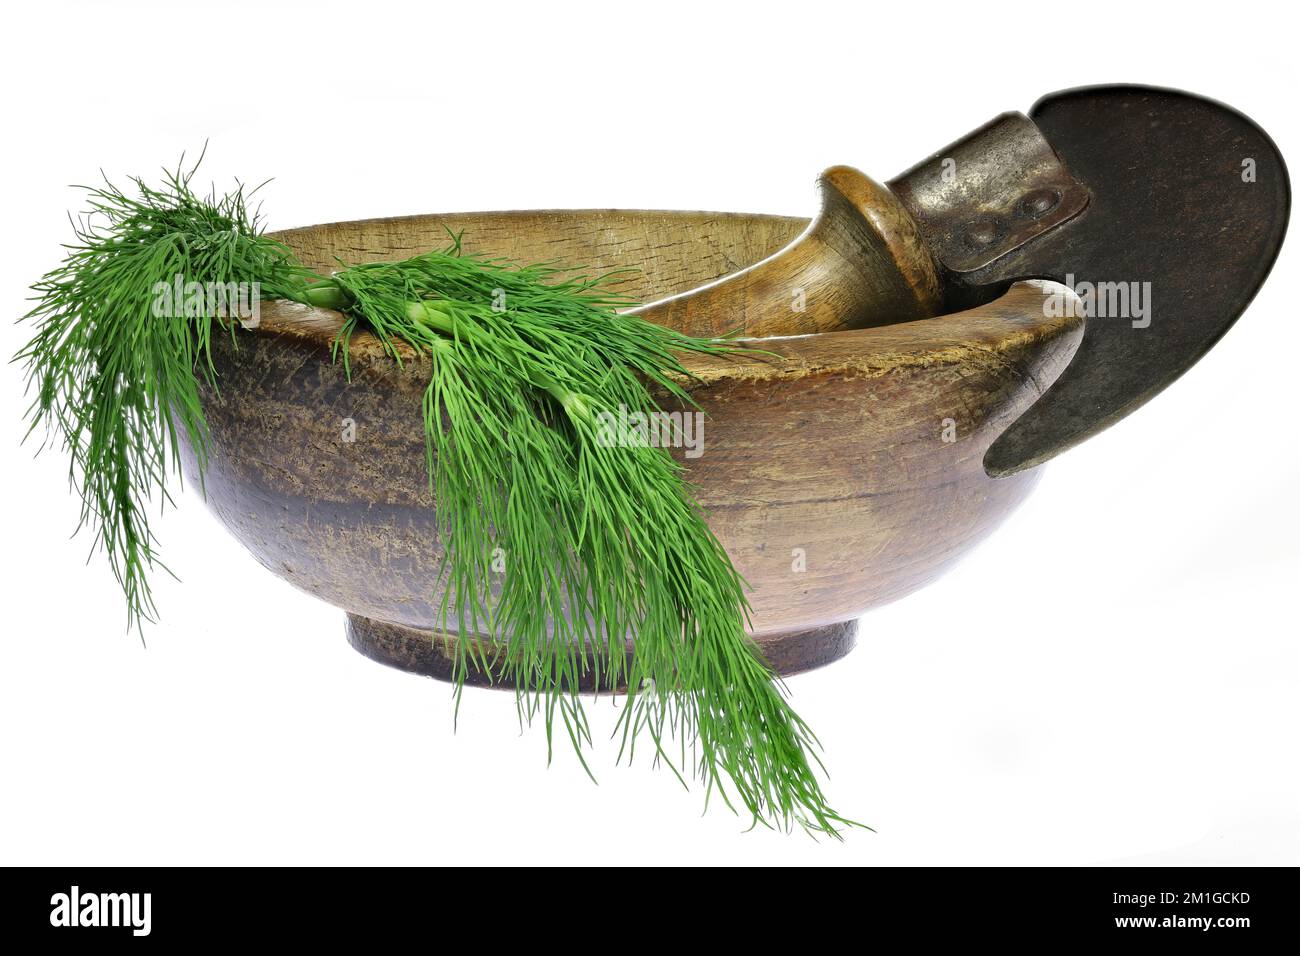 https://c8.alamy.com/comp/2M1GCKD/vintage-herb-chopper-with-fresh-dill-isolated-on-white-background-2M1GCKD.jpg